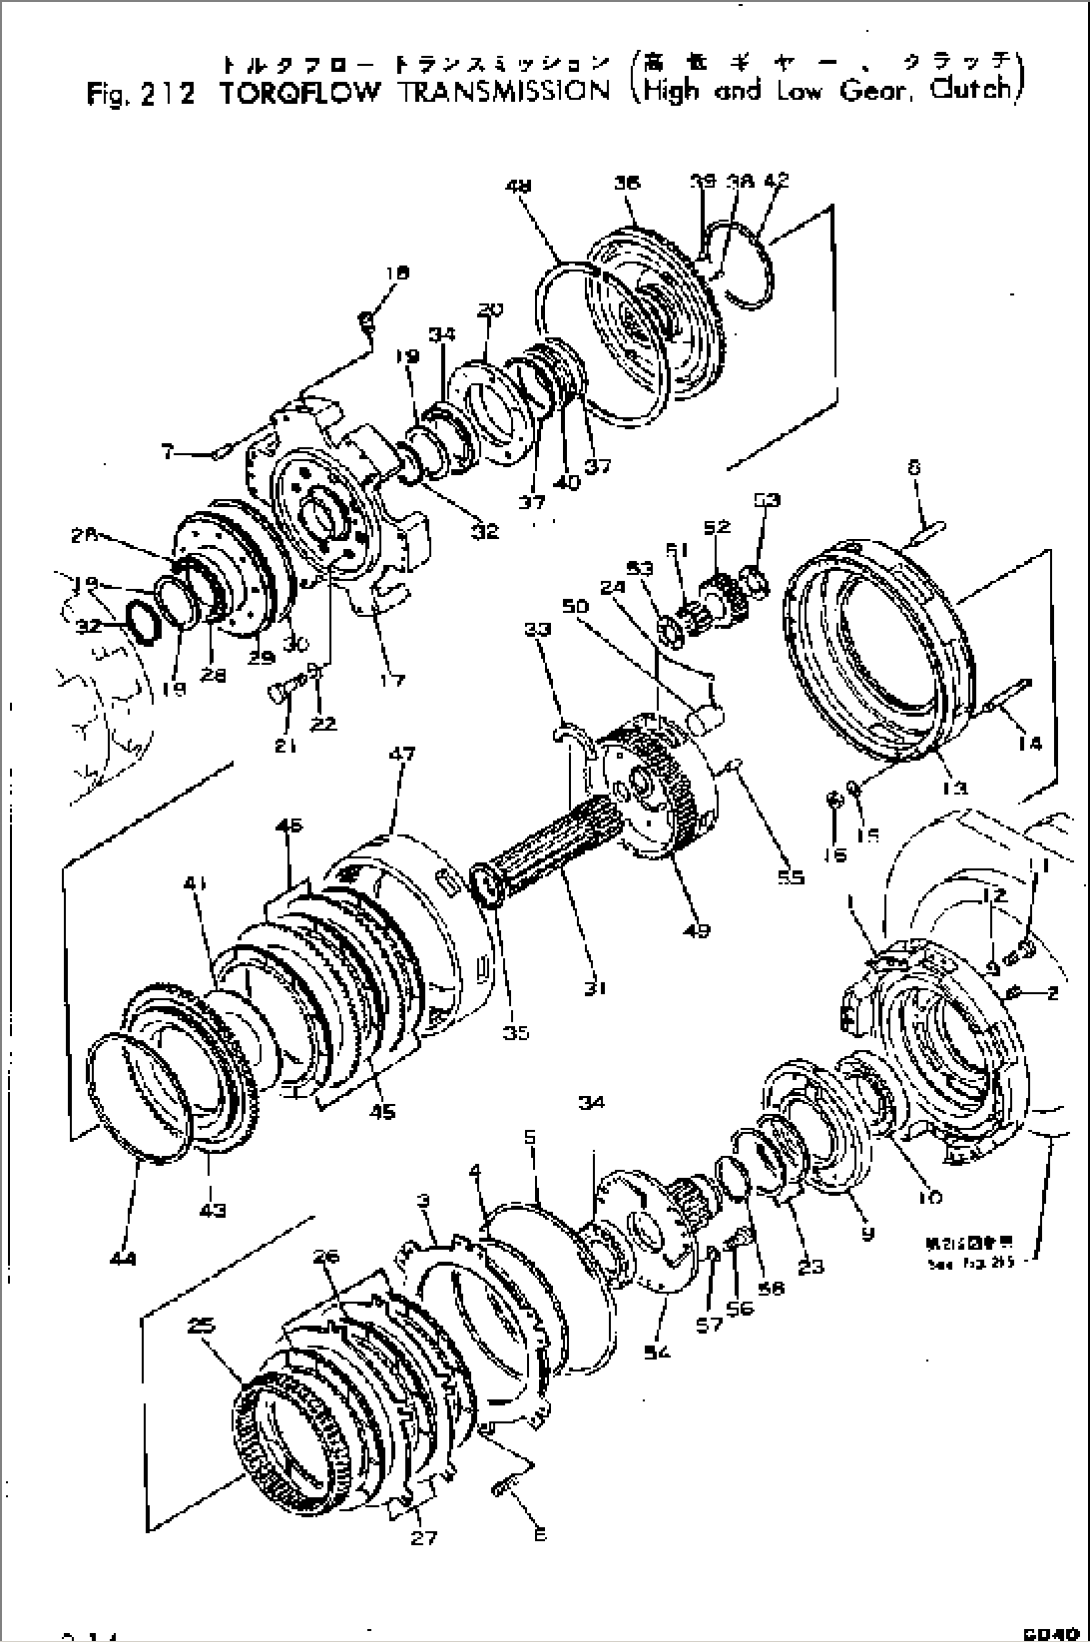 TORQFLOW TRANSMISSION (HIGH AND LOW GEAR¤ CLUTCH)